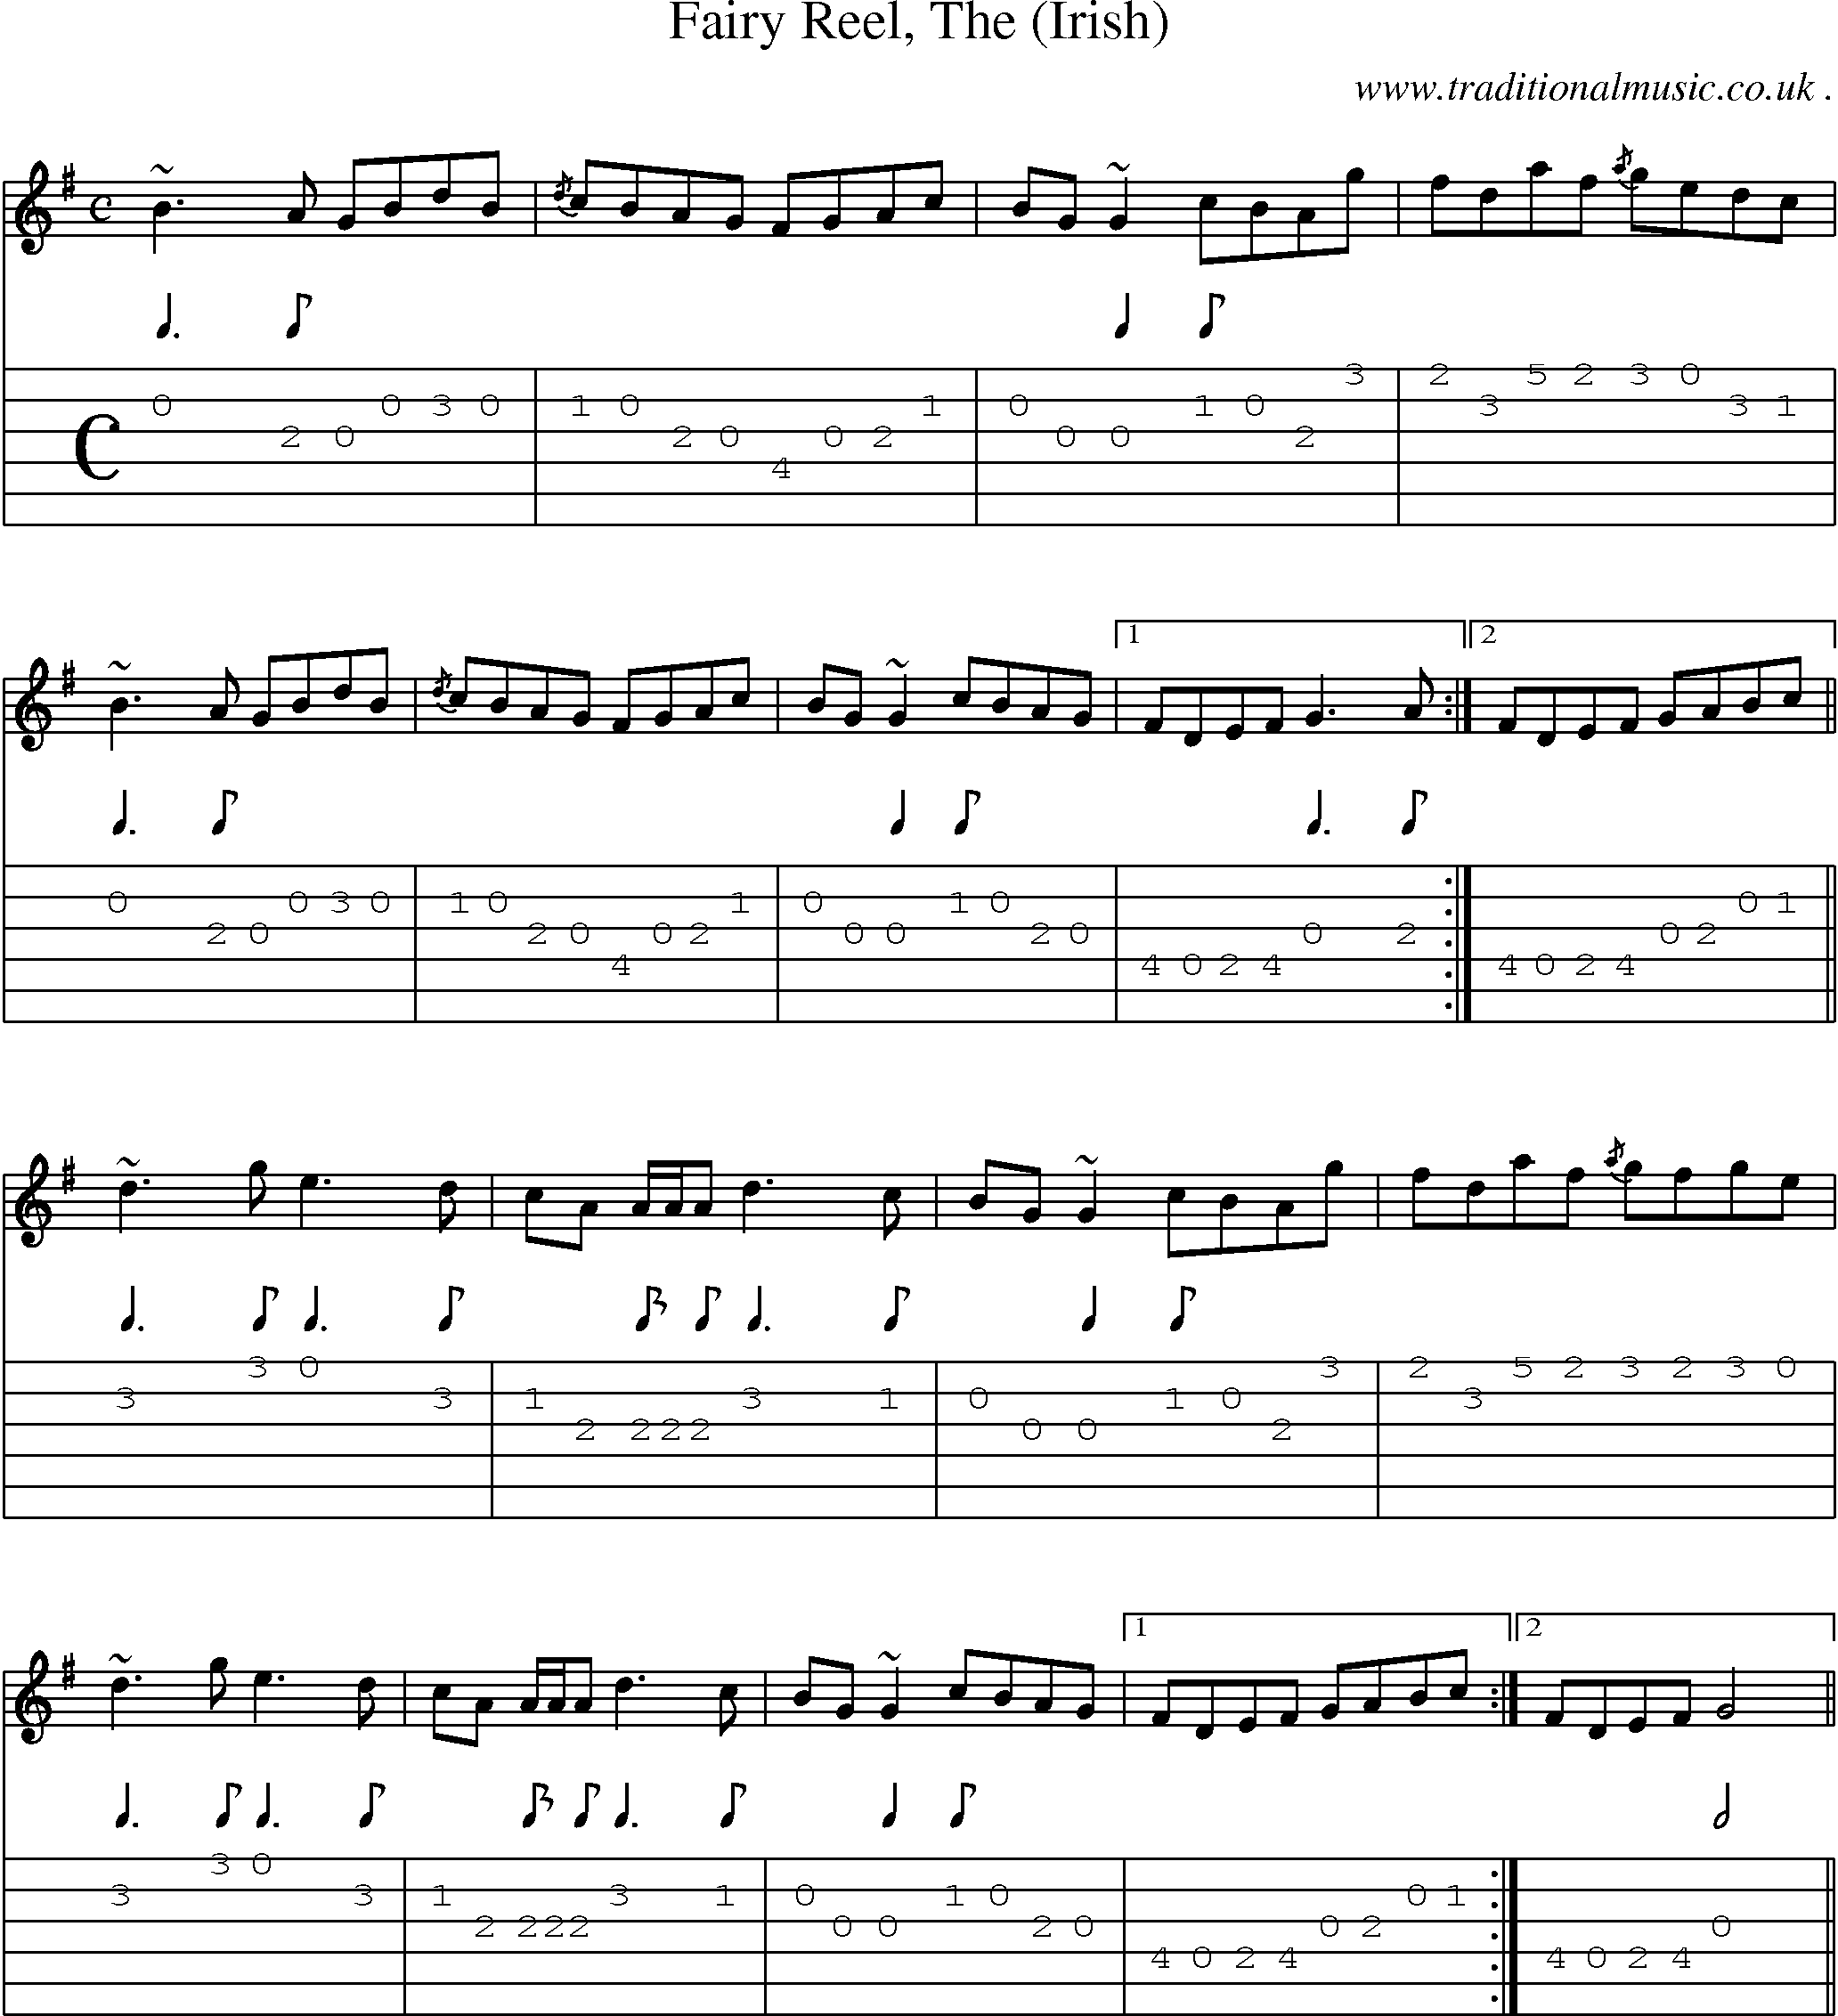 Sheet-music  score, Chords and Guitar Tabs for Fairy Reel The Irish